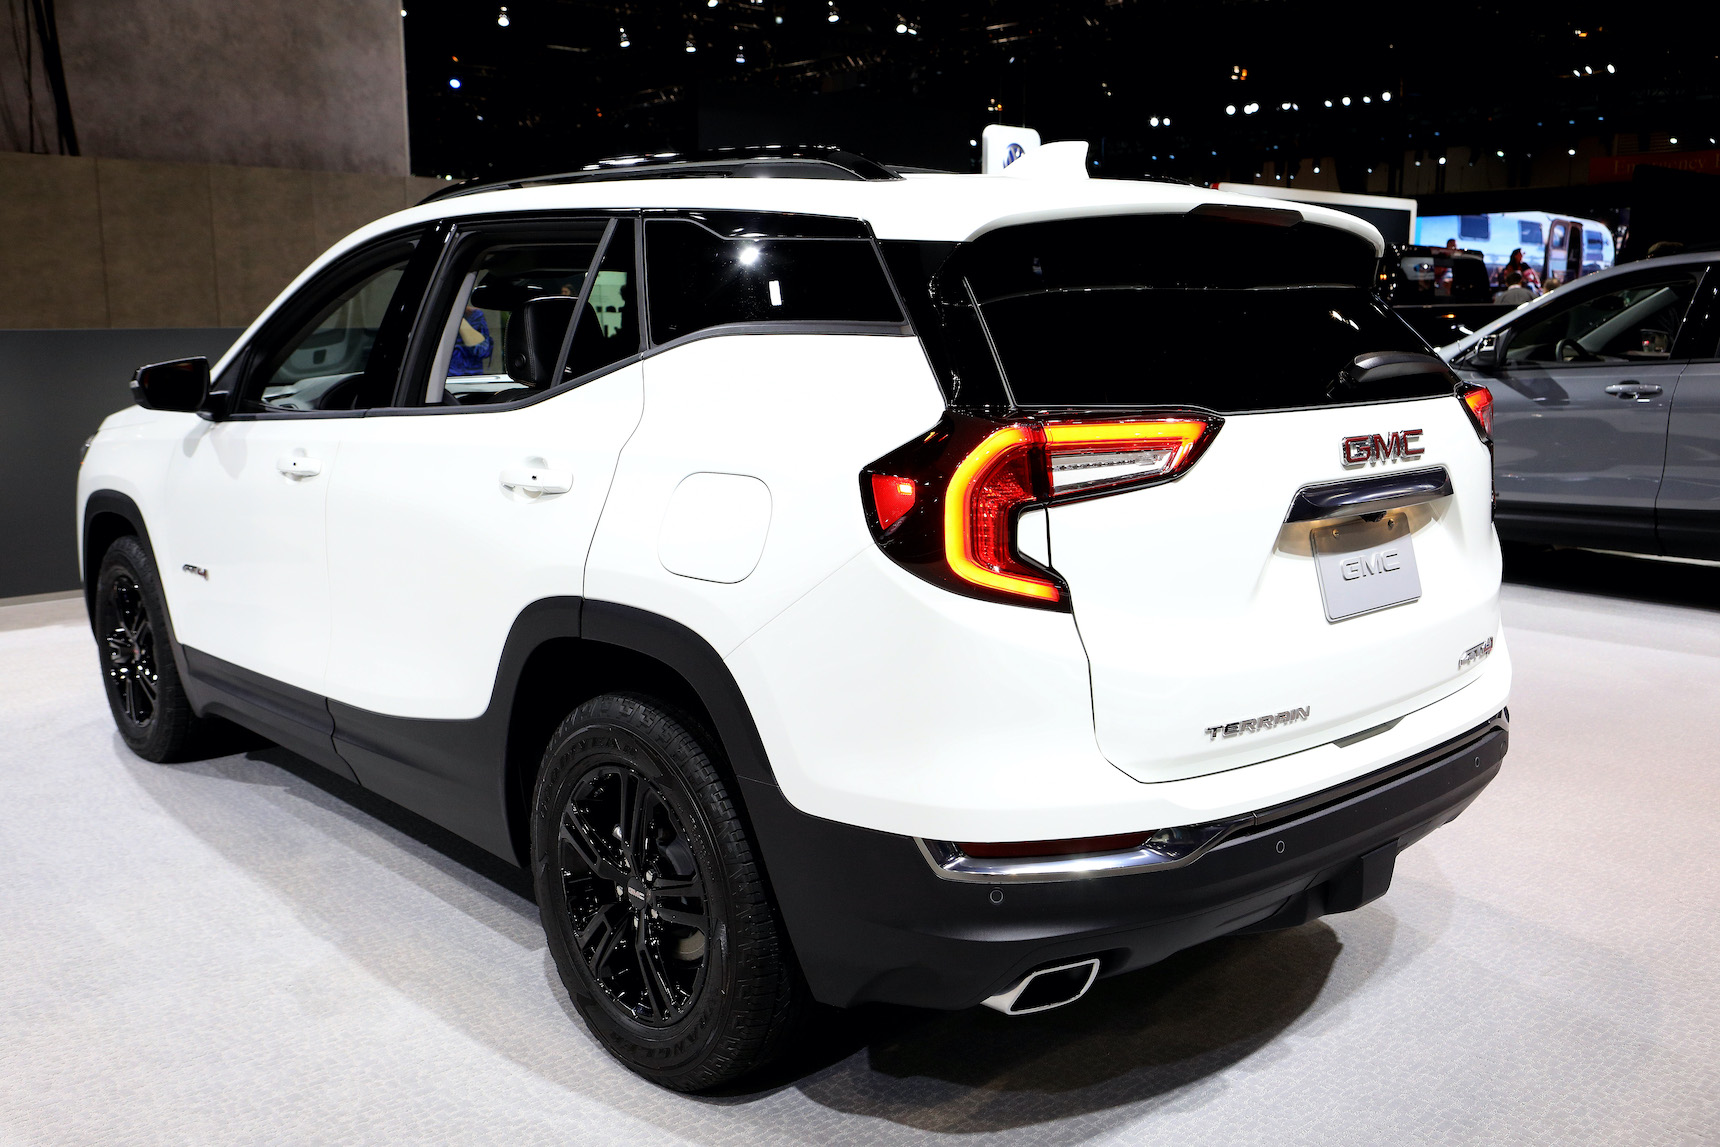 2020 GMC Terrain SUV is on display at the 112th Annual Chicago Auto Show